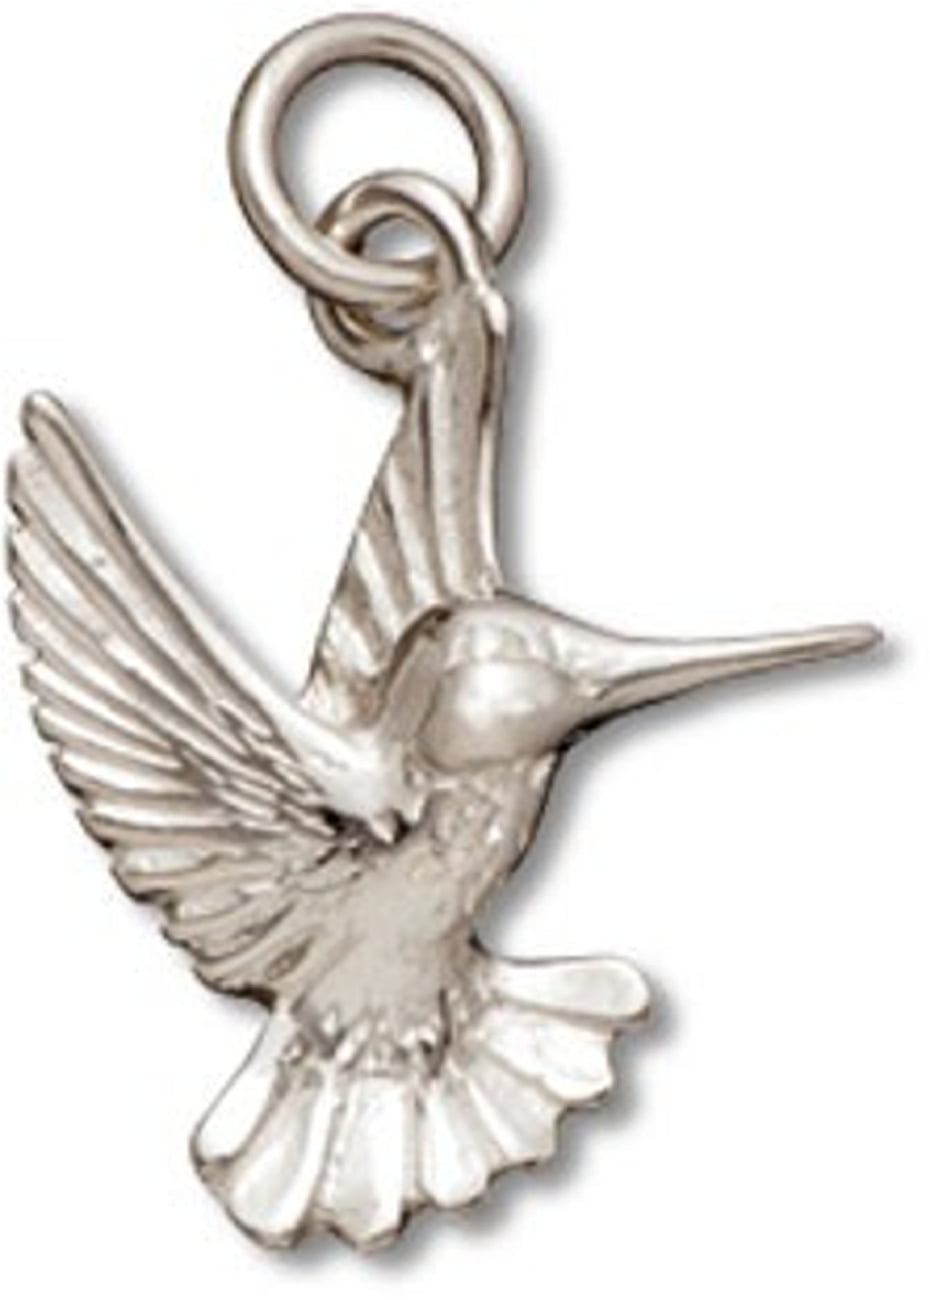 3D Hummingbird Charm Necklace Feeder Bird Gift Wings NEW 925 Sterling Silver